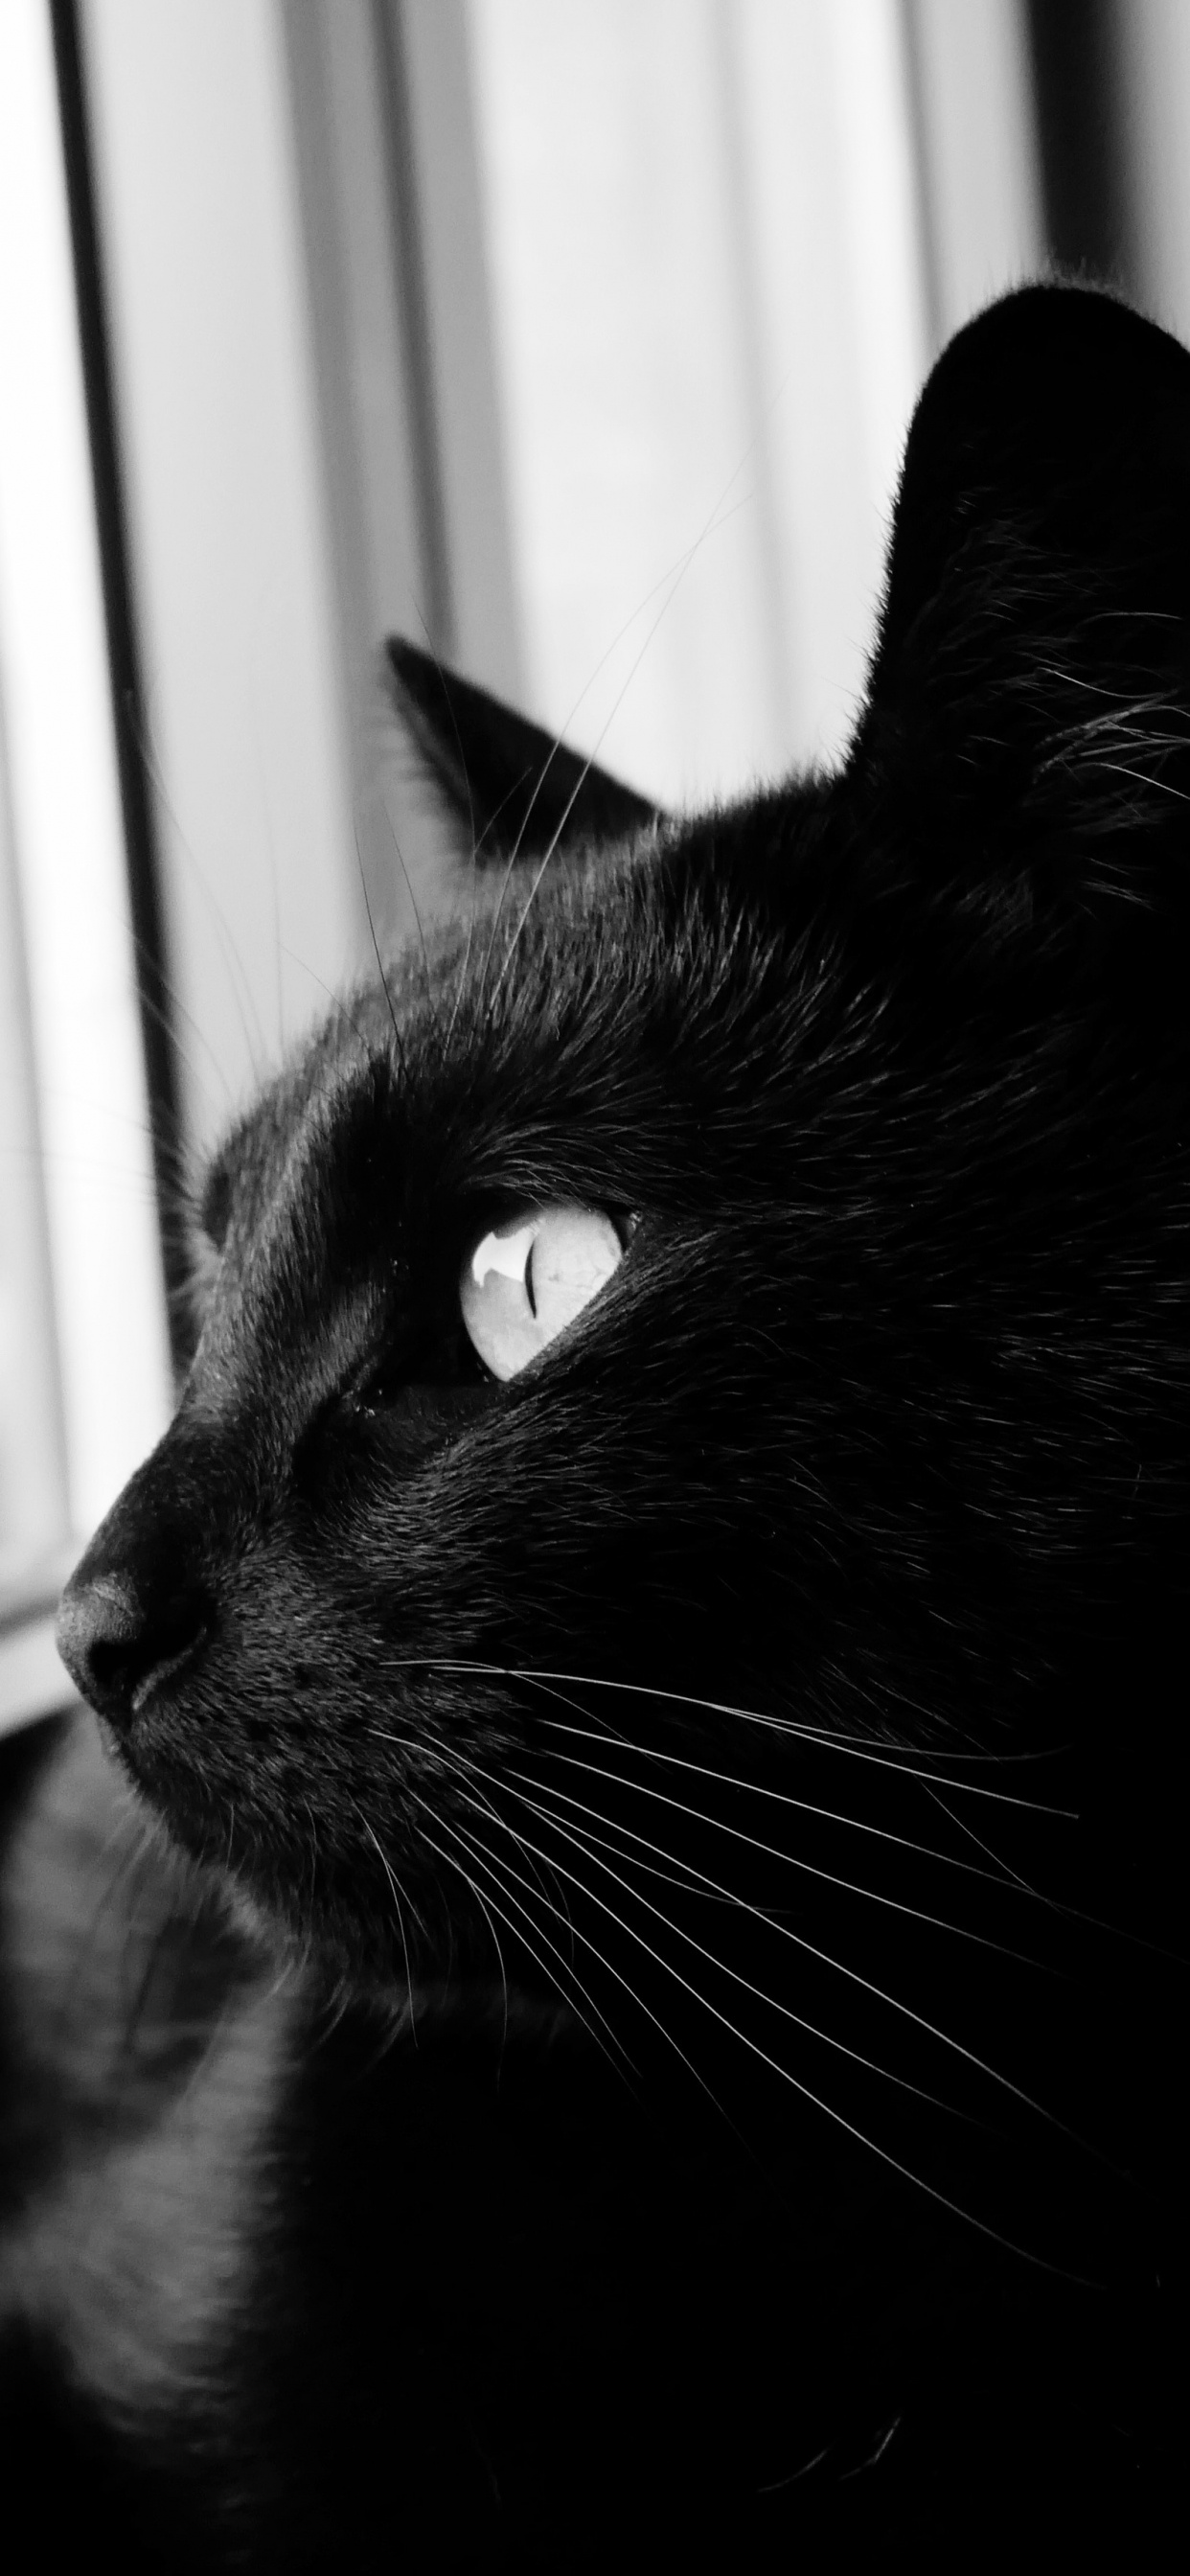 Black Cat Looking at The Window. Wallpaper in 1242x2688 Resolution